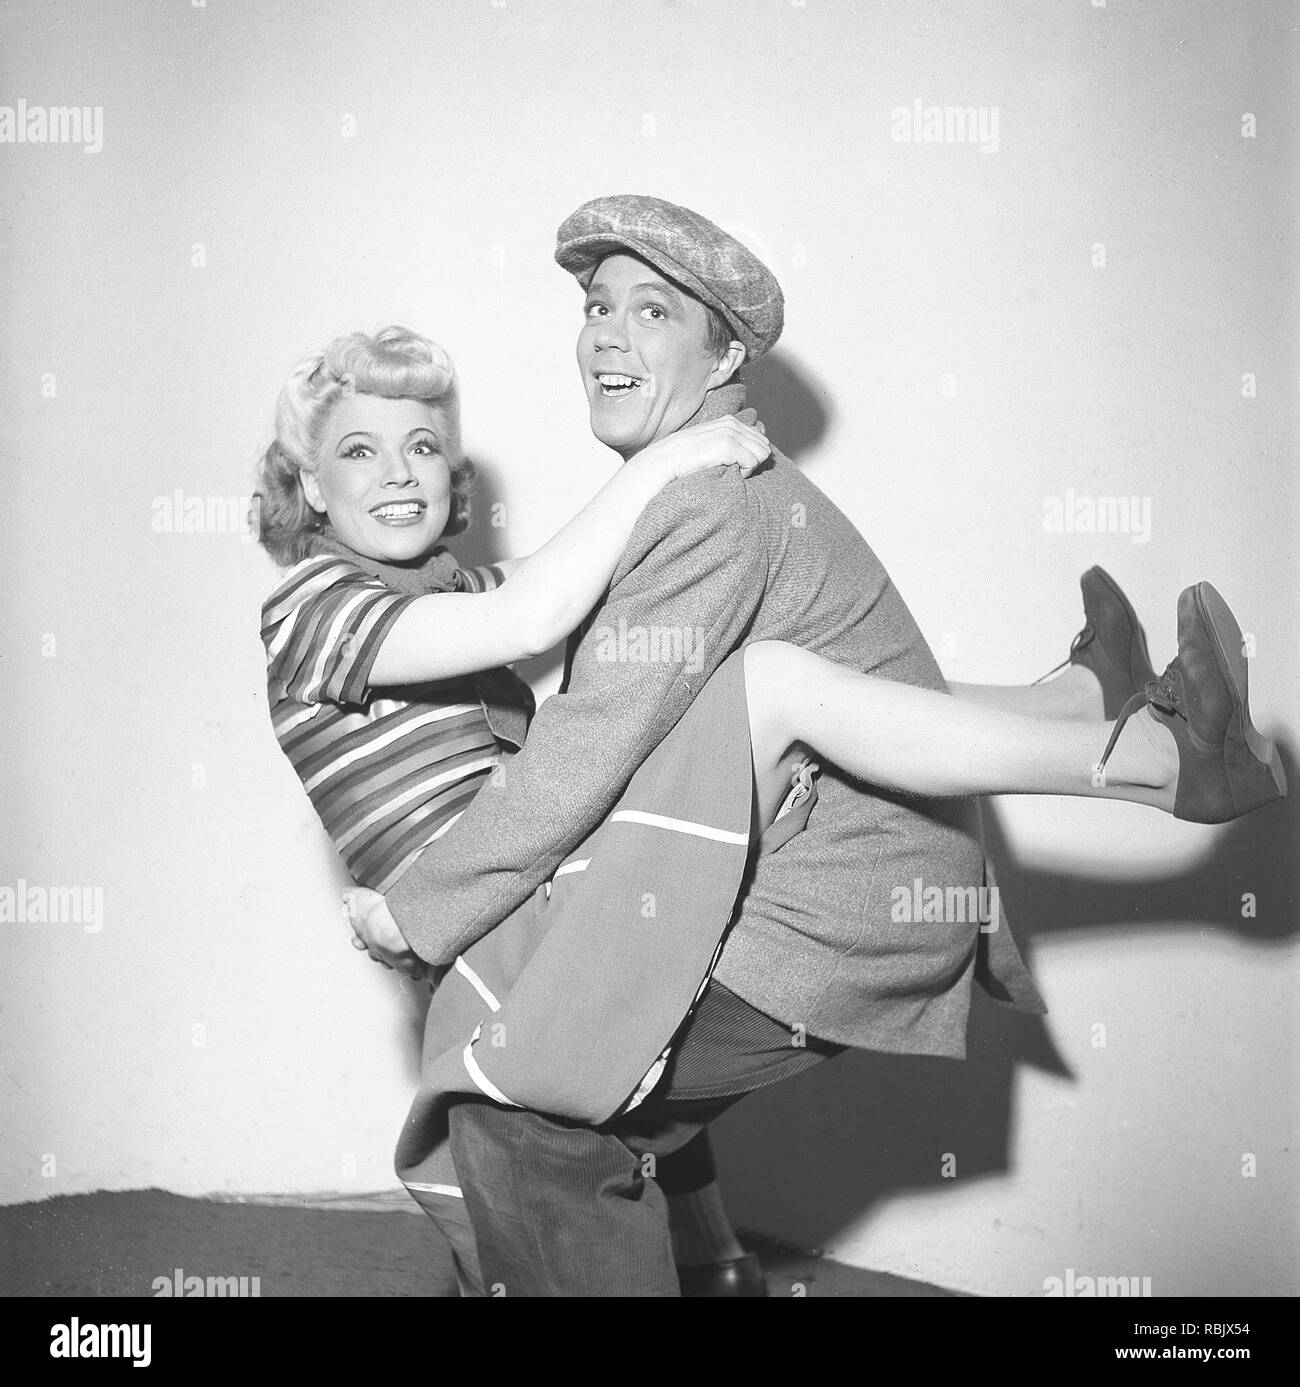 Dancing in the 1940s. A young couple at the theatre dancing together in their stage costumes.  Photo Kristoffersson Ref L35-3. Sweden 1945 Stock Photo